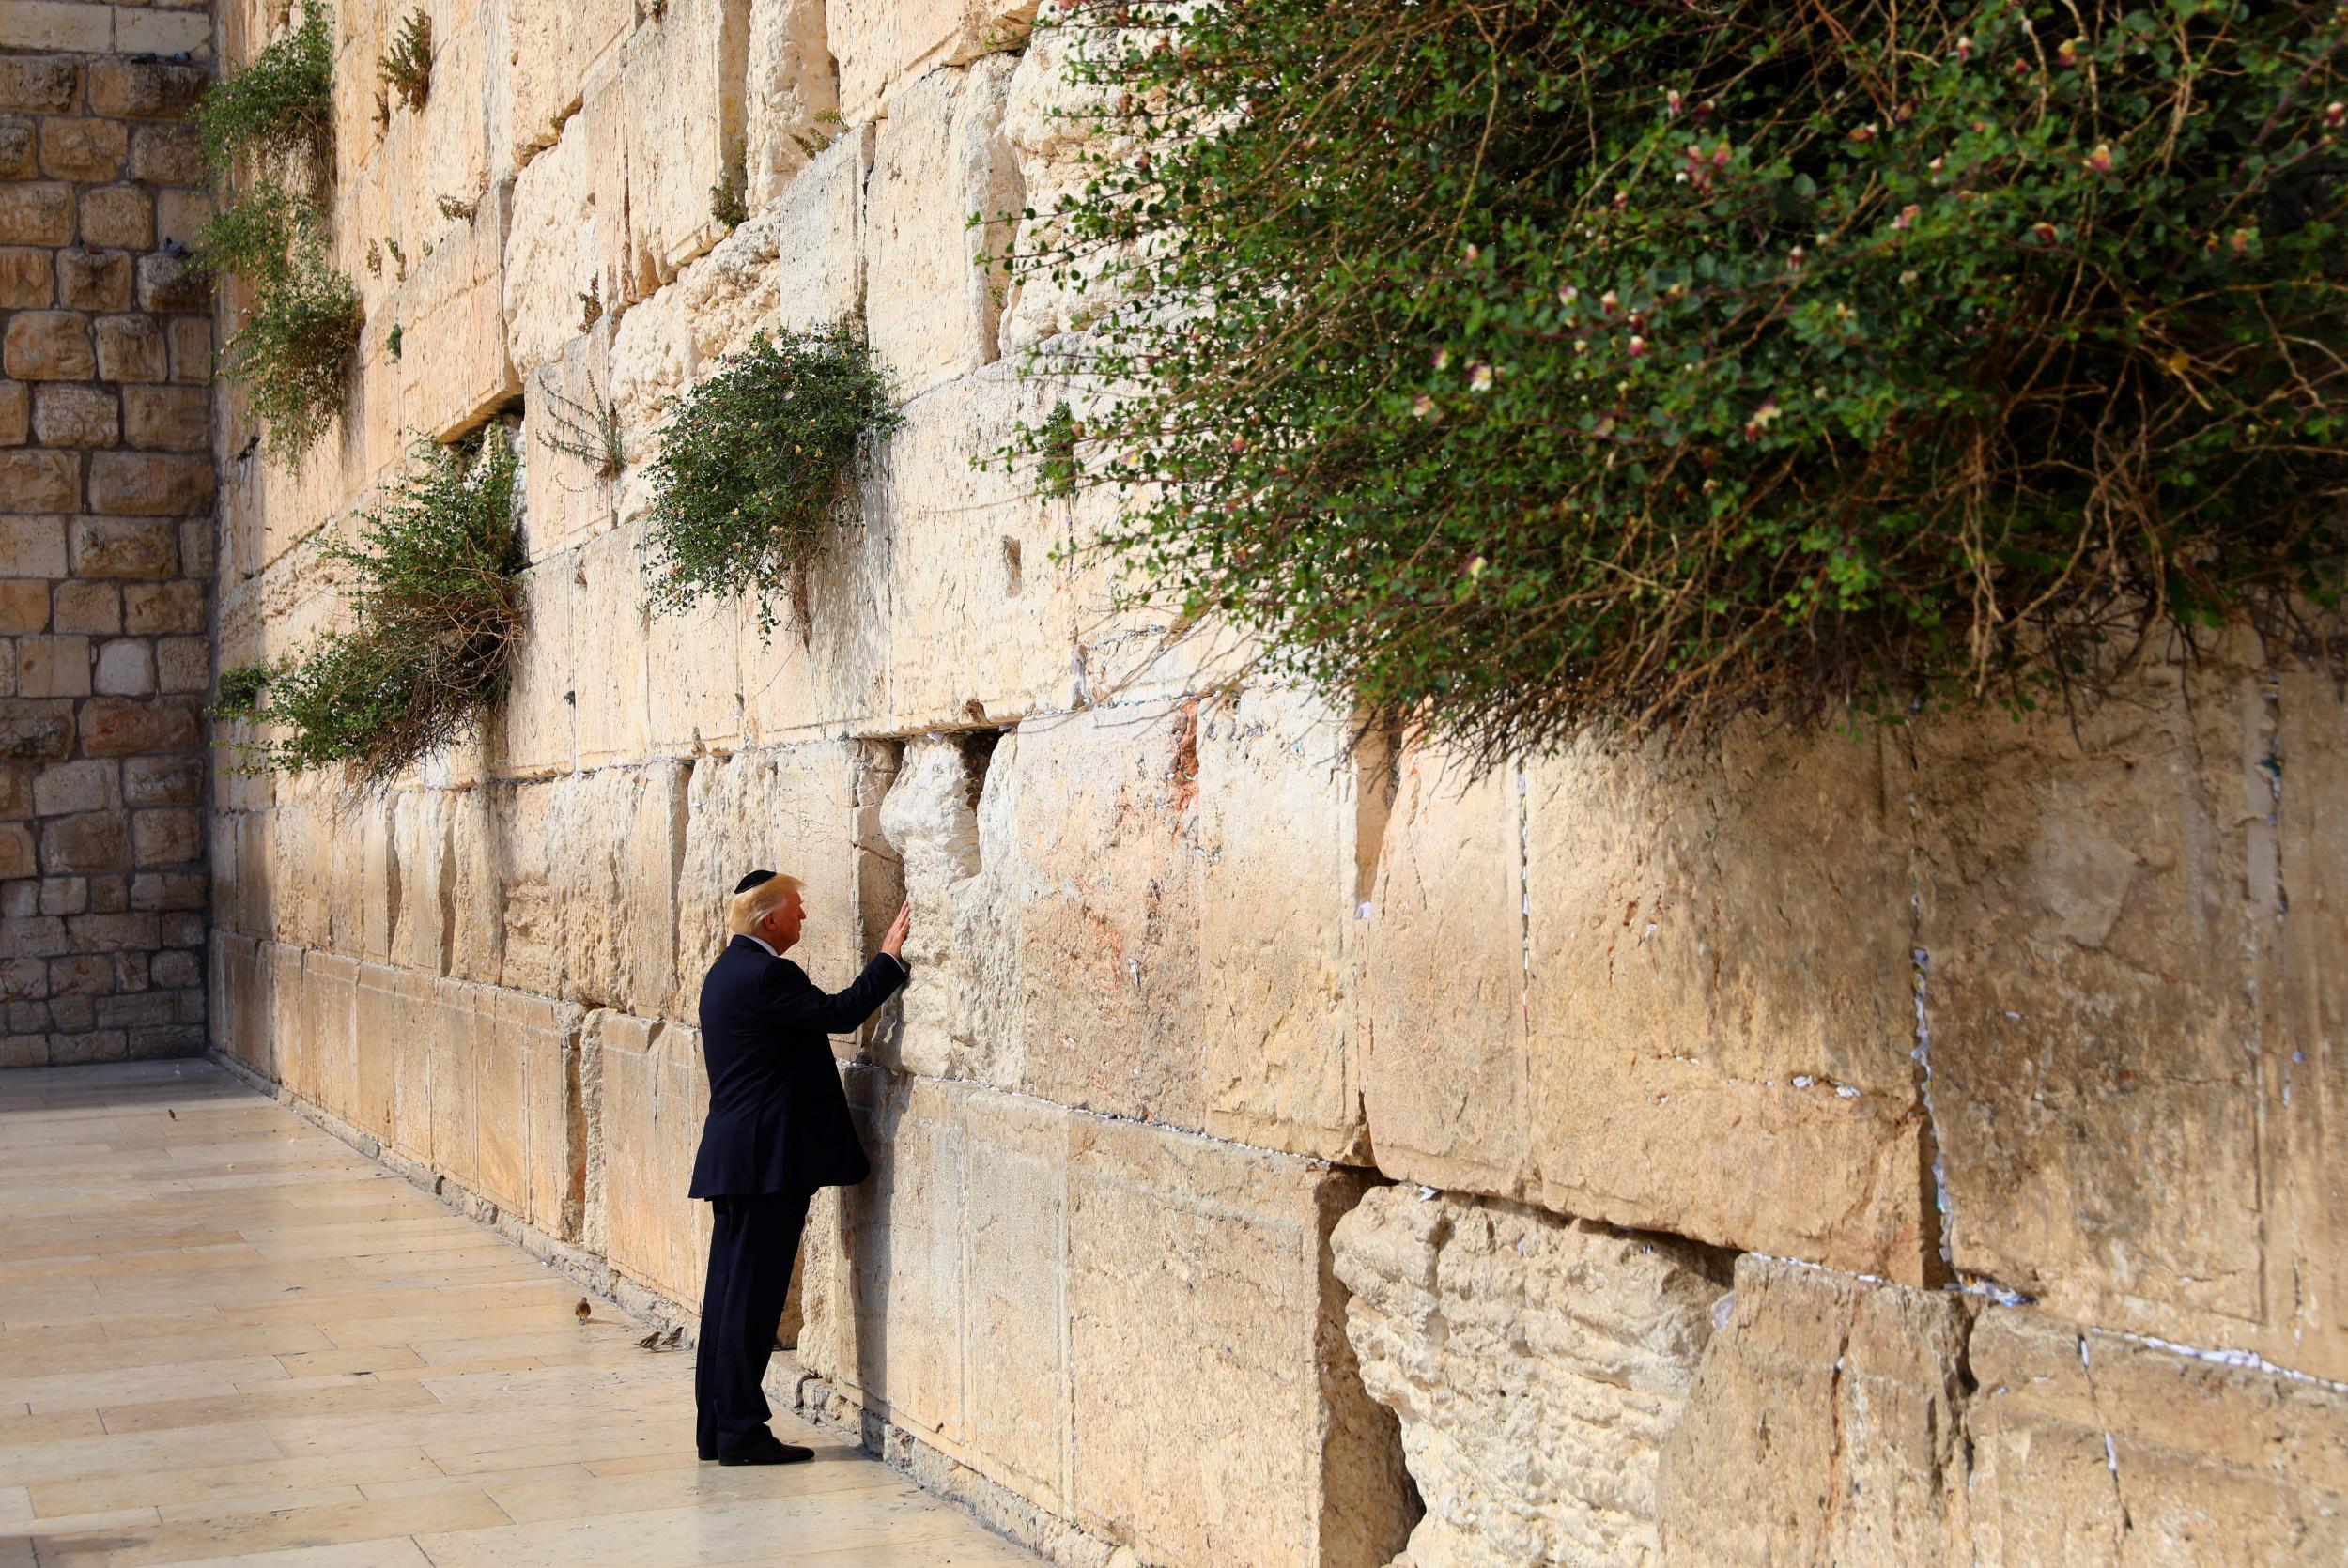 Trump's traveling press pool was separated, per tradition, by gender at the Western Wall